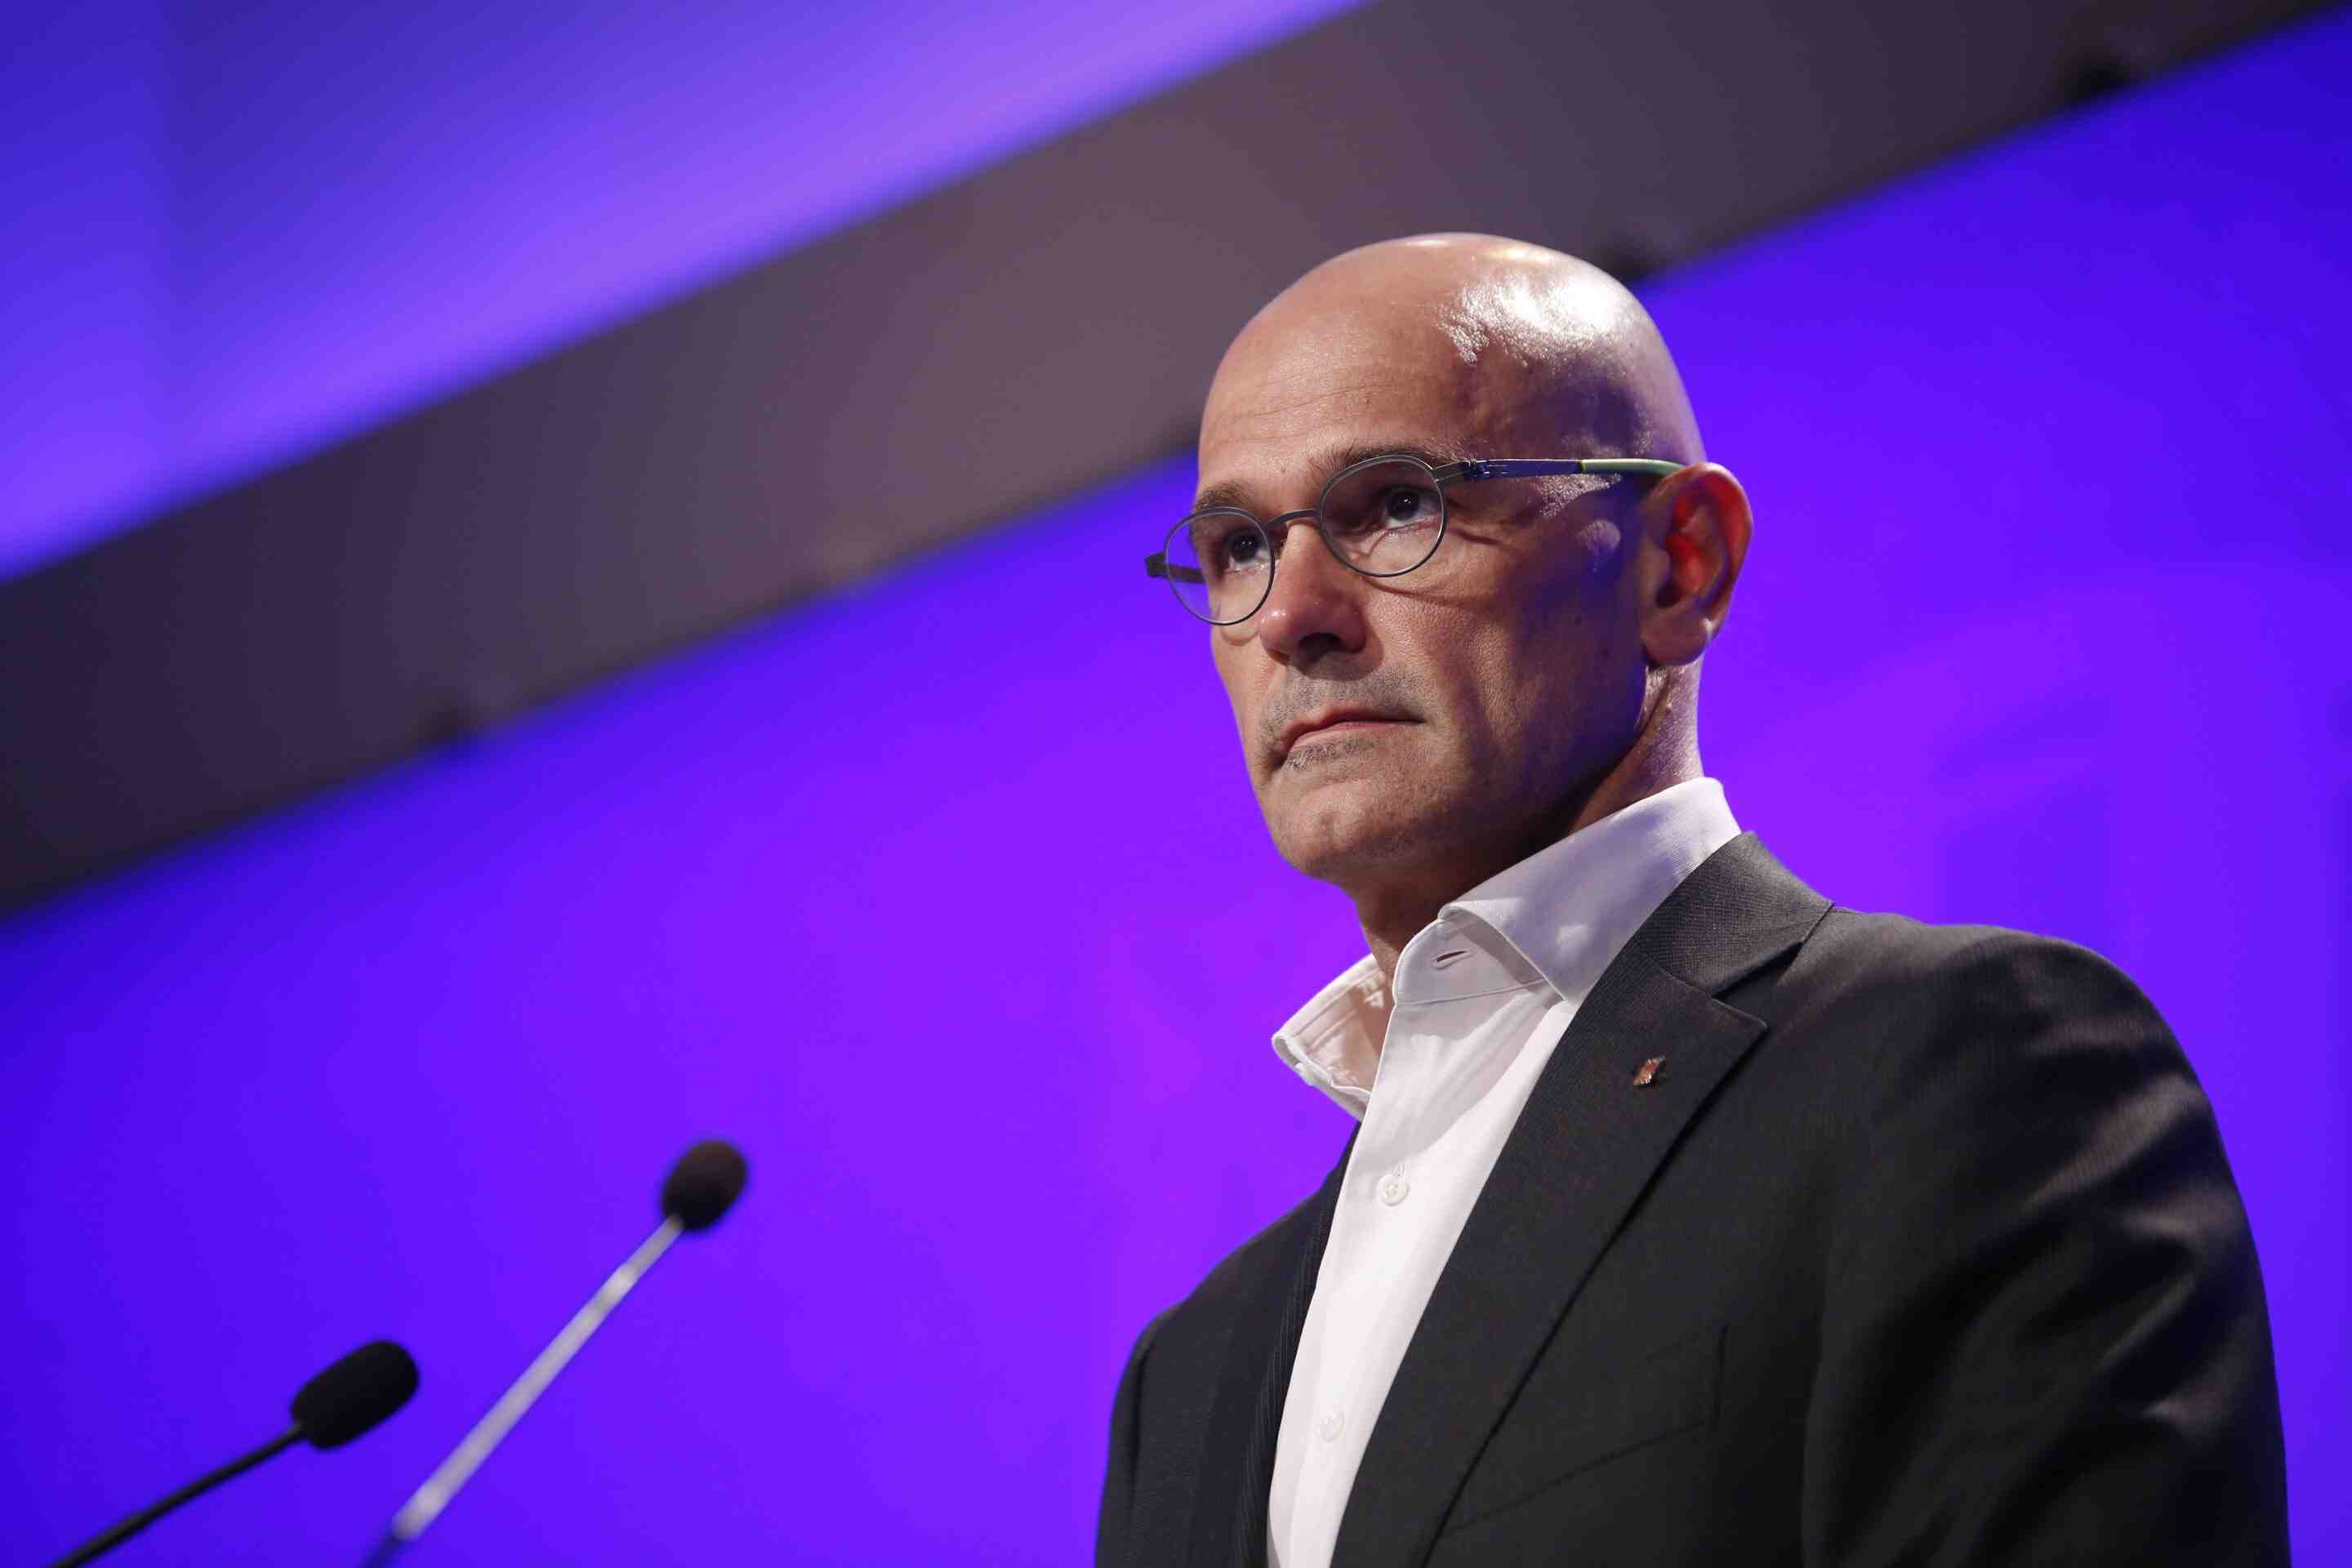 Catalan minister Romeva to the BBC: Officials "won't follow orders from Madrid"